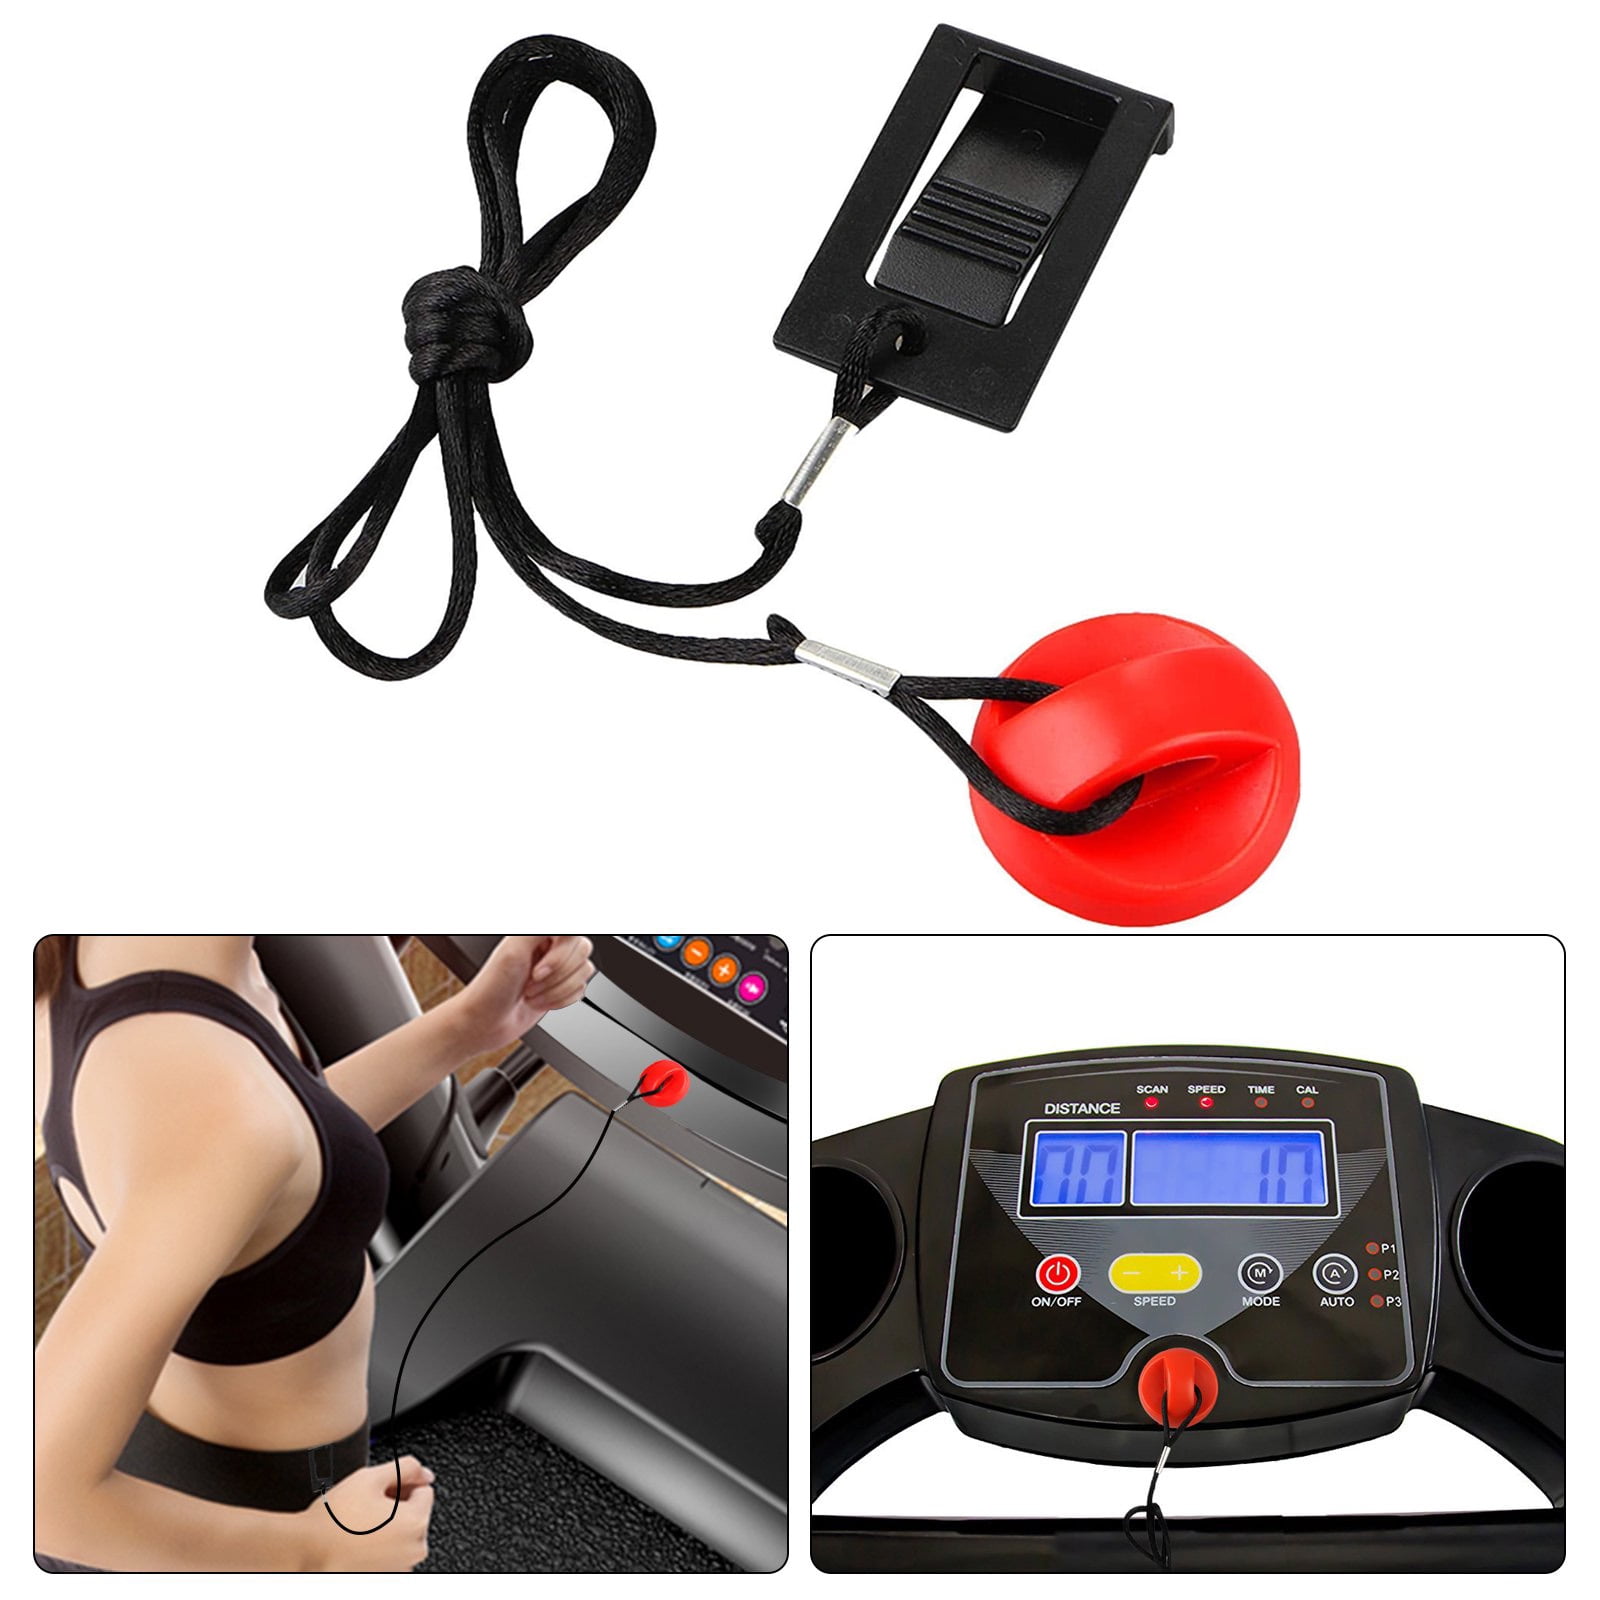 Running Machine Safety Key Treadmill Magnetic Security Round Switch Lock Red 